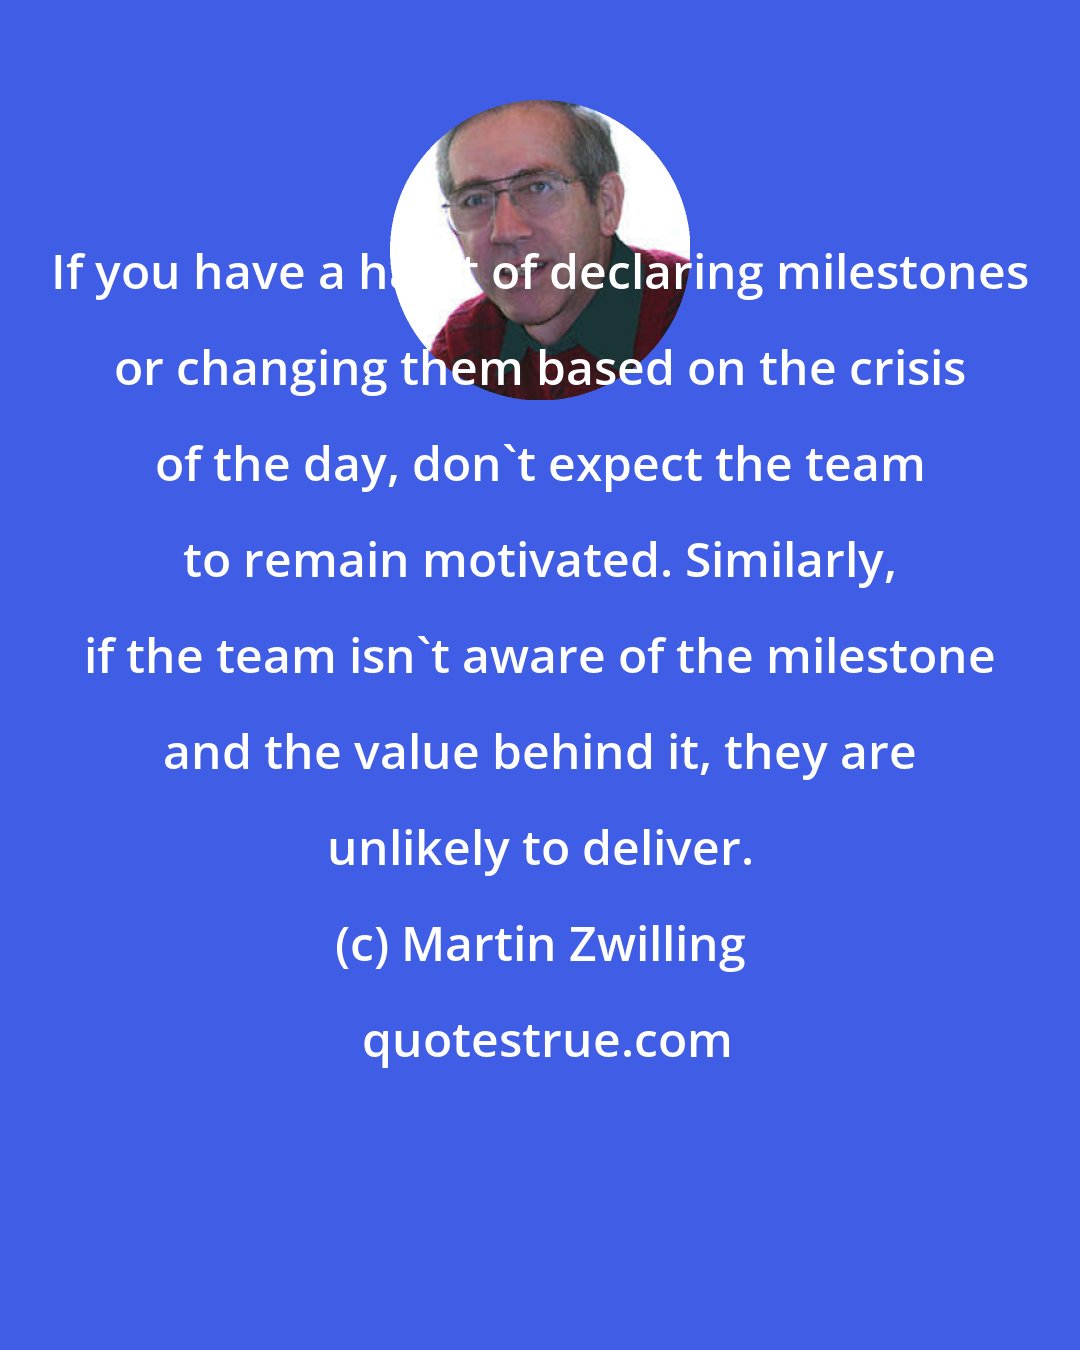 Martin Zwilling: If you have a habit of declaring milestones or changing them based on the crisis of the day, don't expect the team to remain motivated. Similarly, if the team isn't aware of the milestone and the value behind it, they are unlikely to deliver.